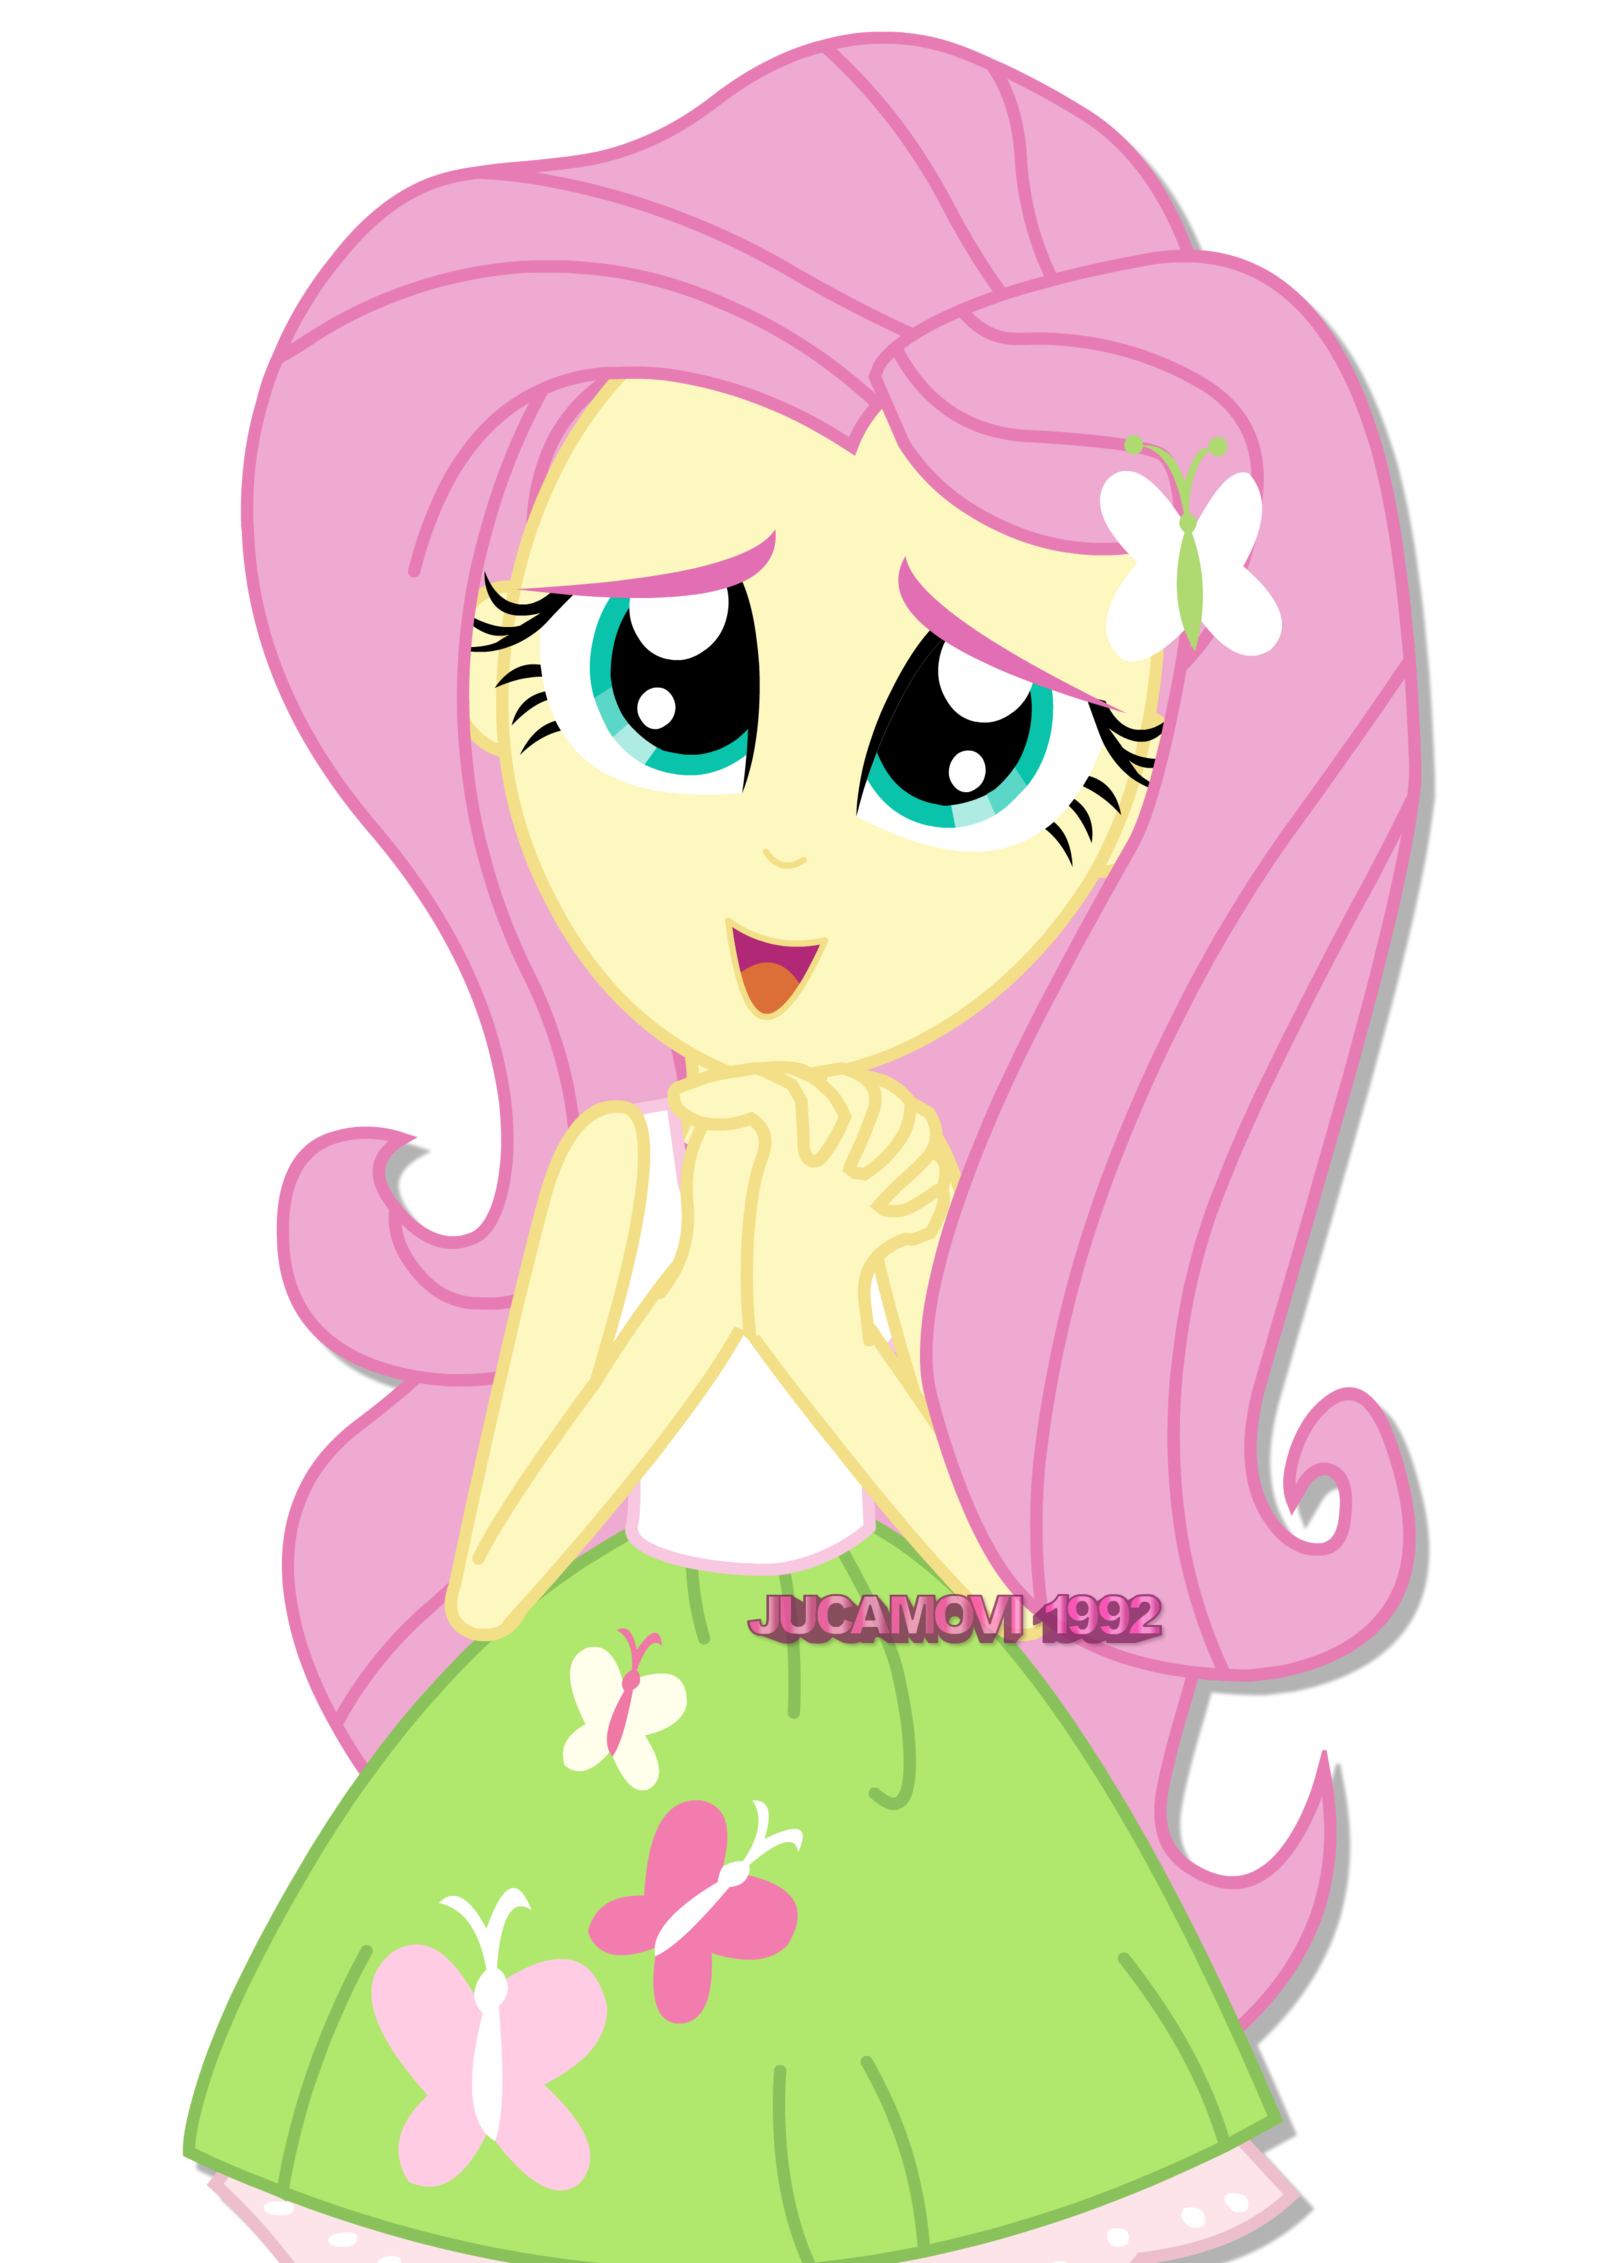 1453426__safe_artist-colon-jucamovi1992_fluttershy_equestria+girls_female_human_obtrusive+watermark_simple+background_solo_transparent+background_vecto.png